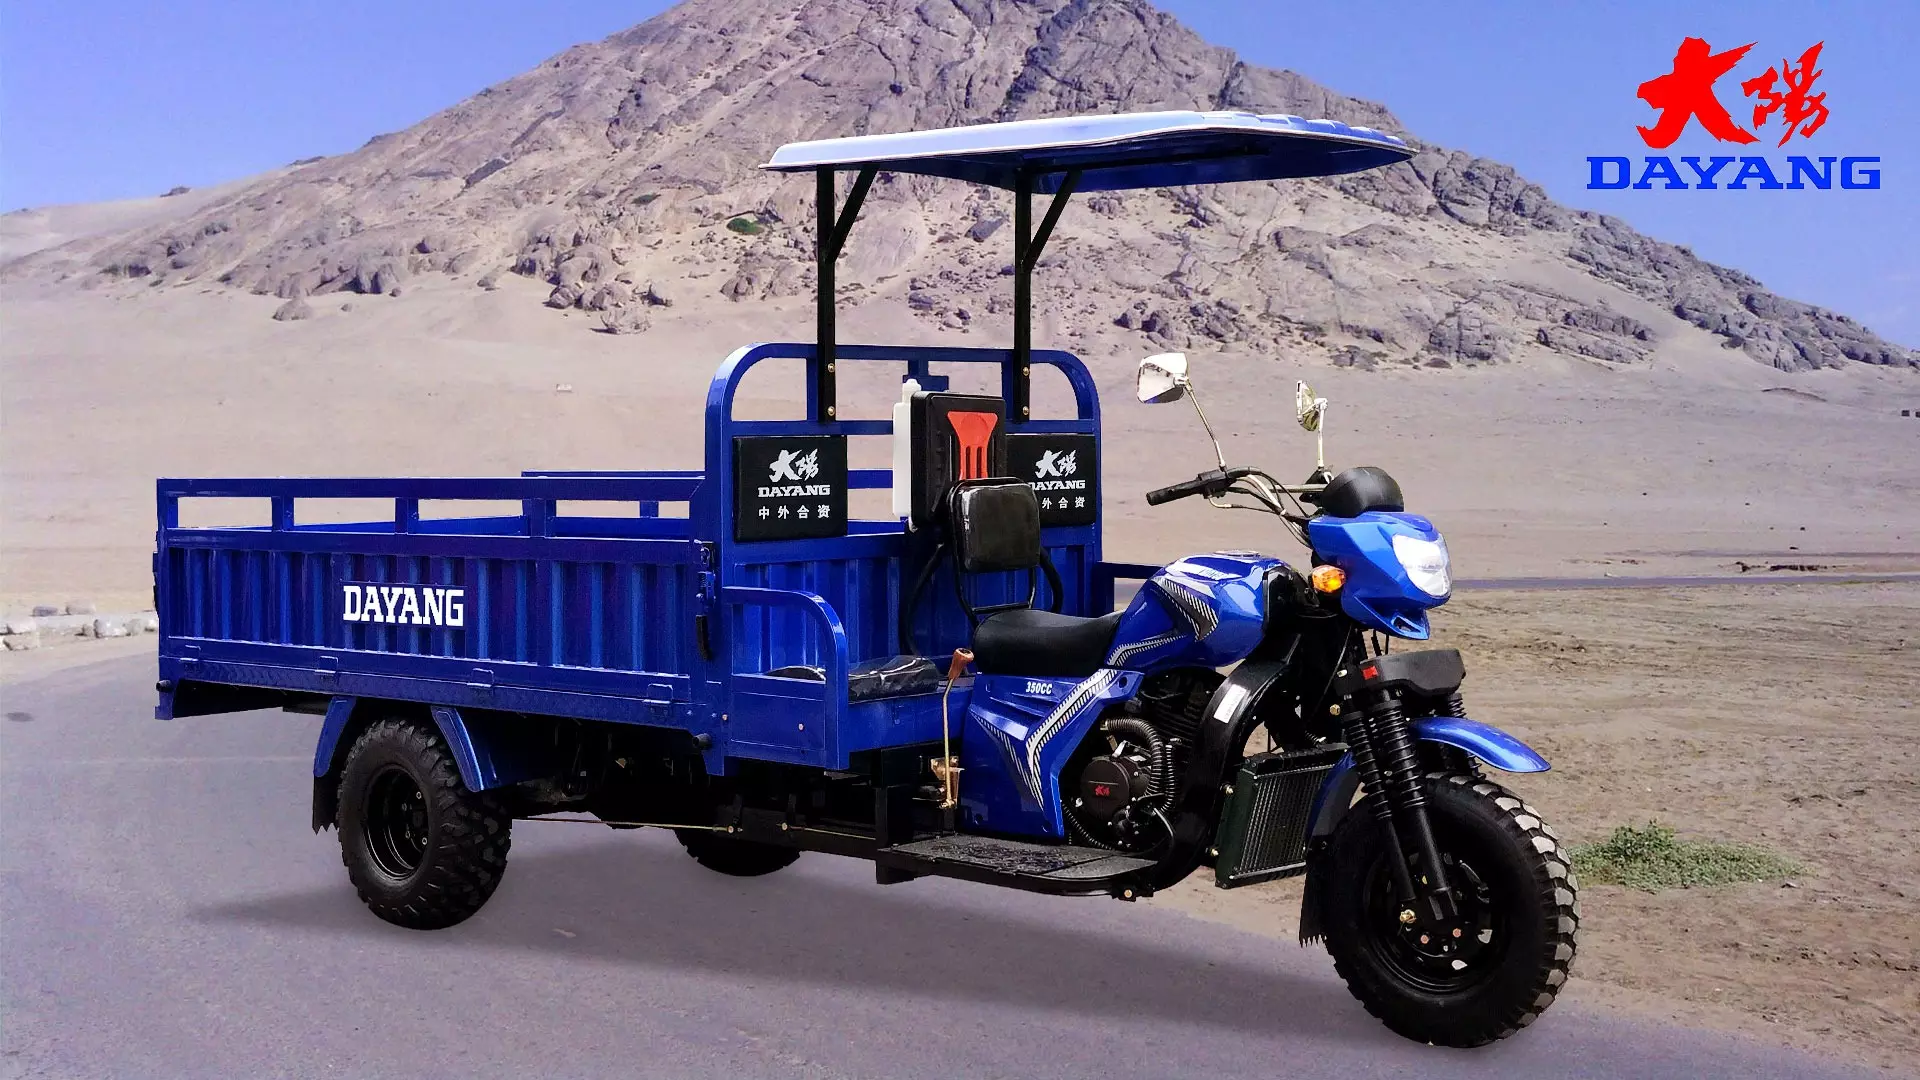 China Manufacture lowest price comfortable driving egypt motor price for sale tricycle cargo petrol